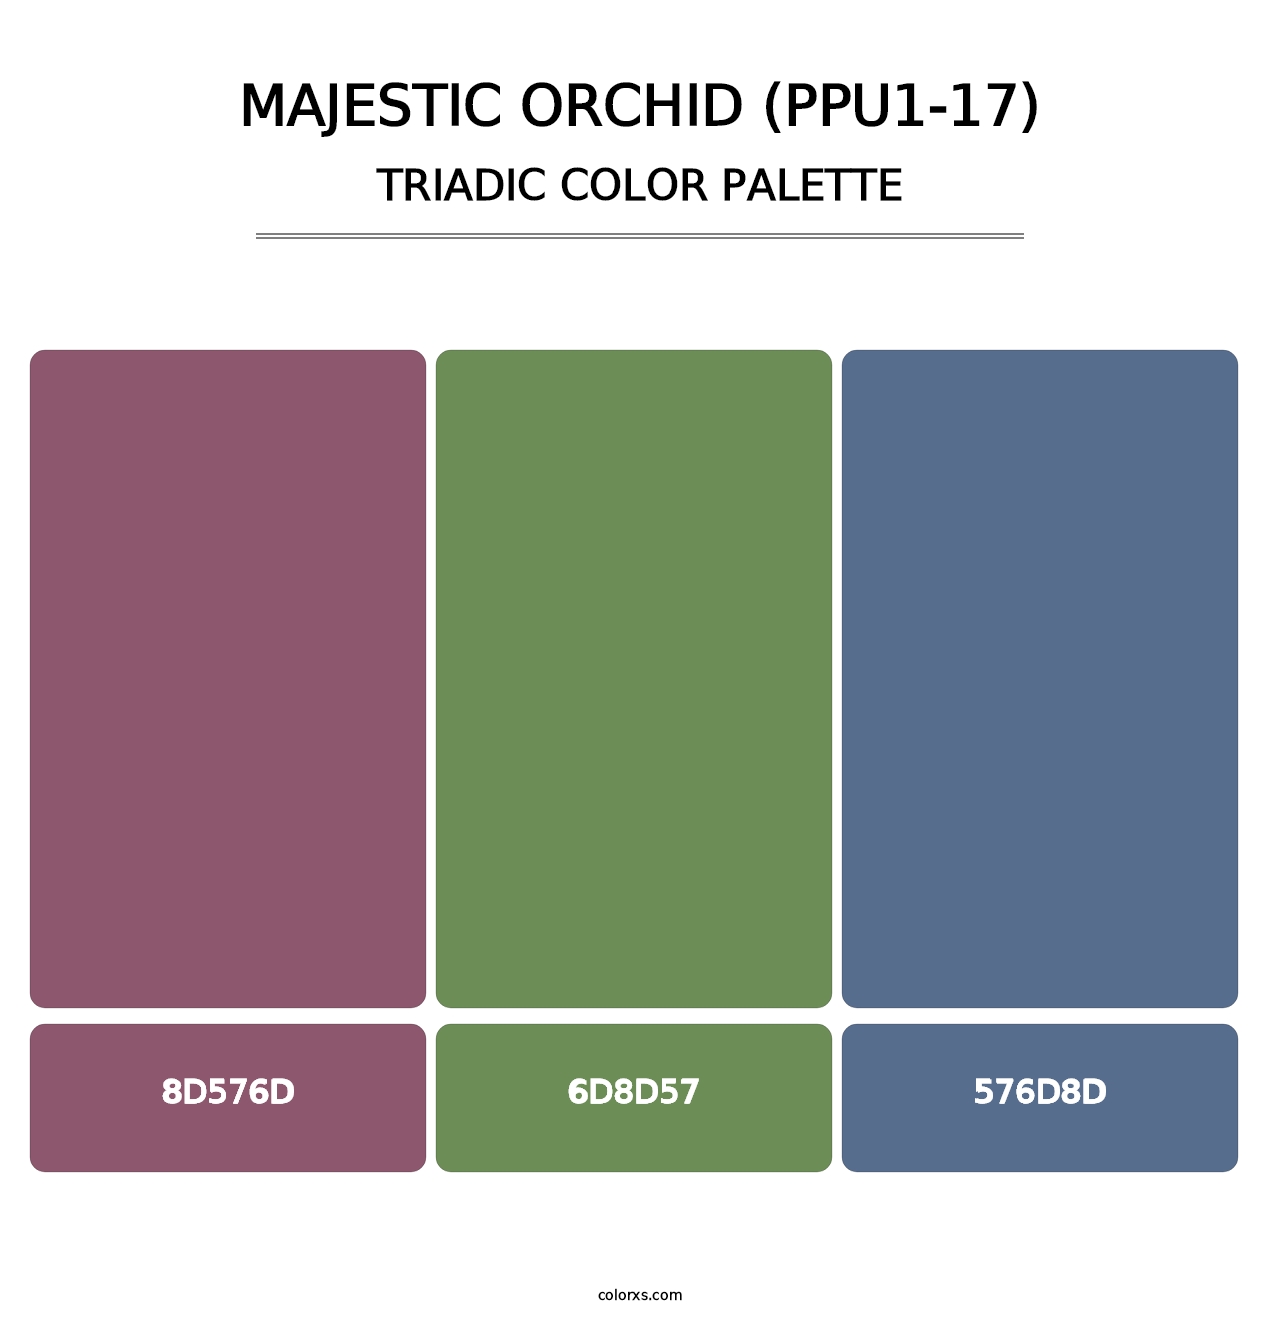 Majestic Orchid (PPU1-17) - Triadic Color Palette